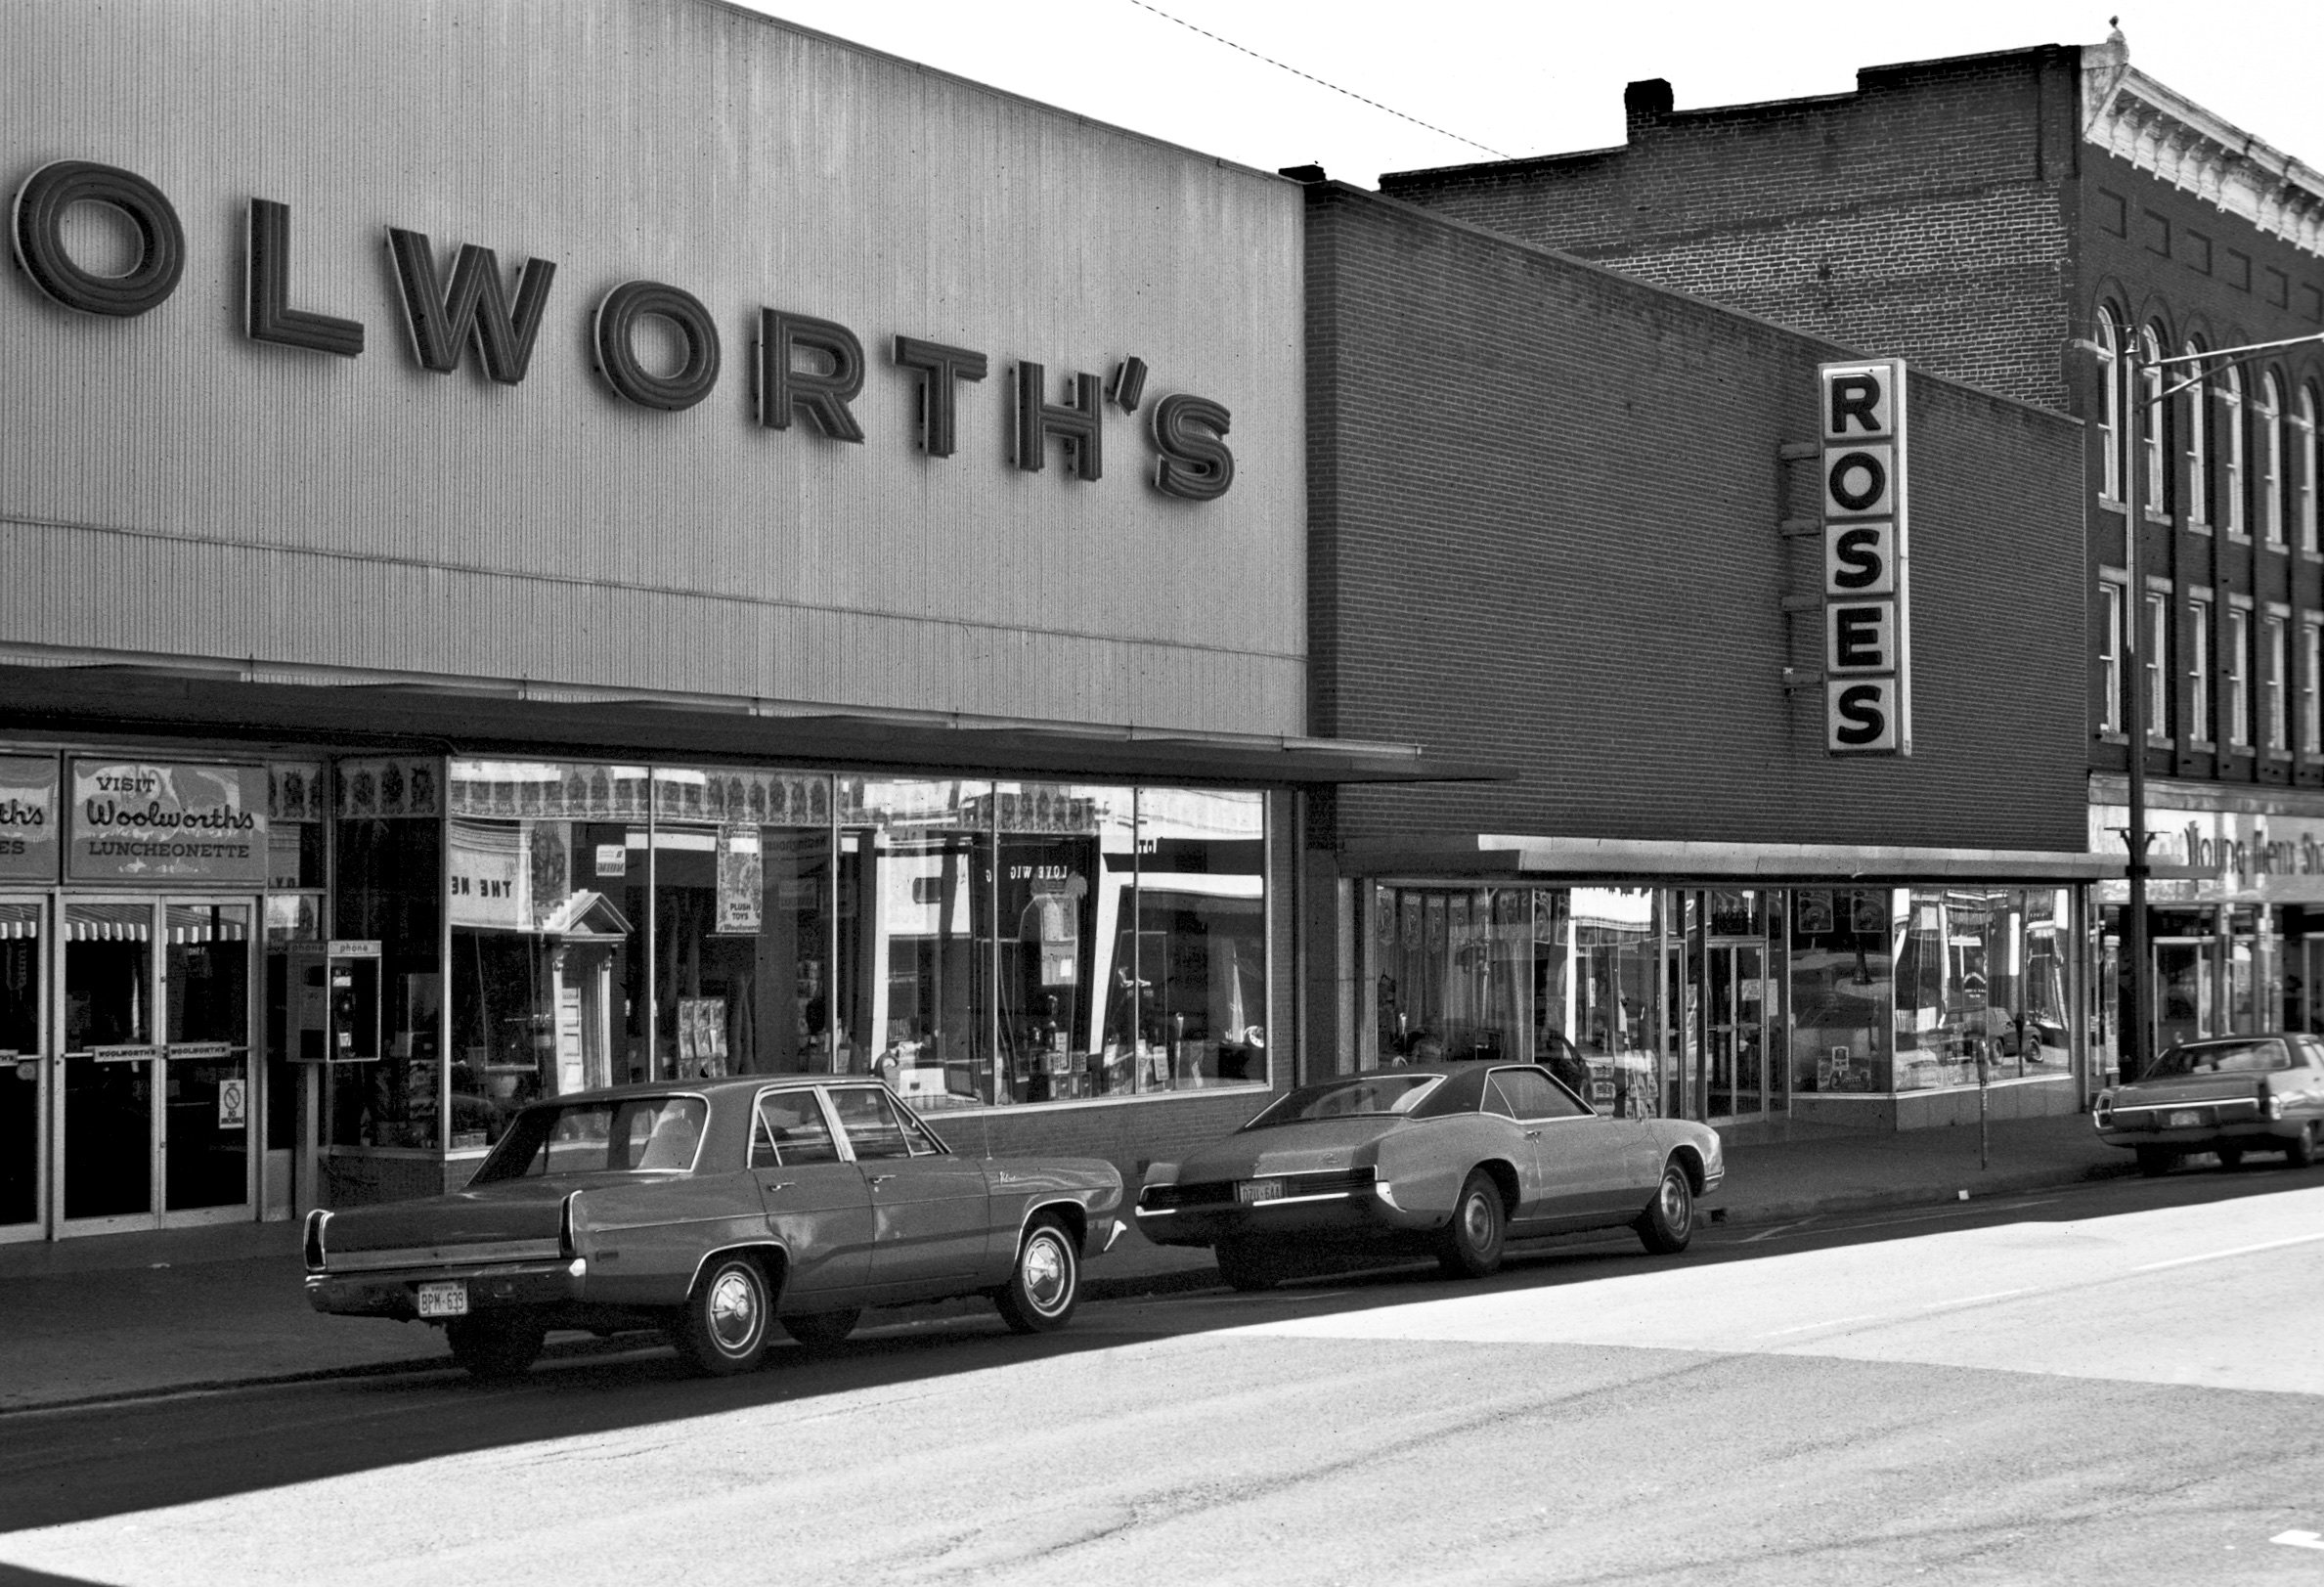 Woolworth’s and Roses, Downtown Date, 1976